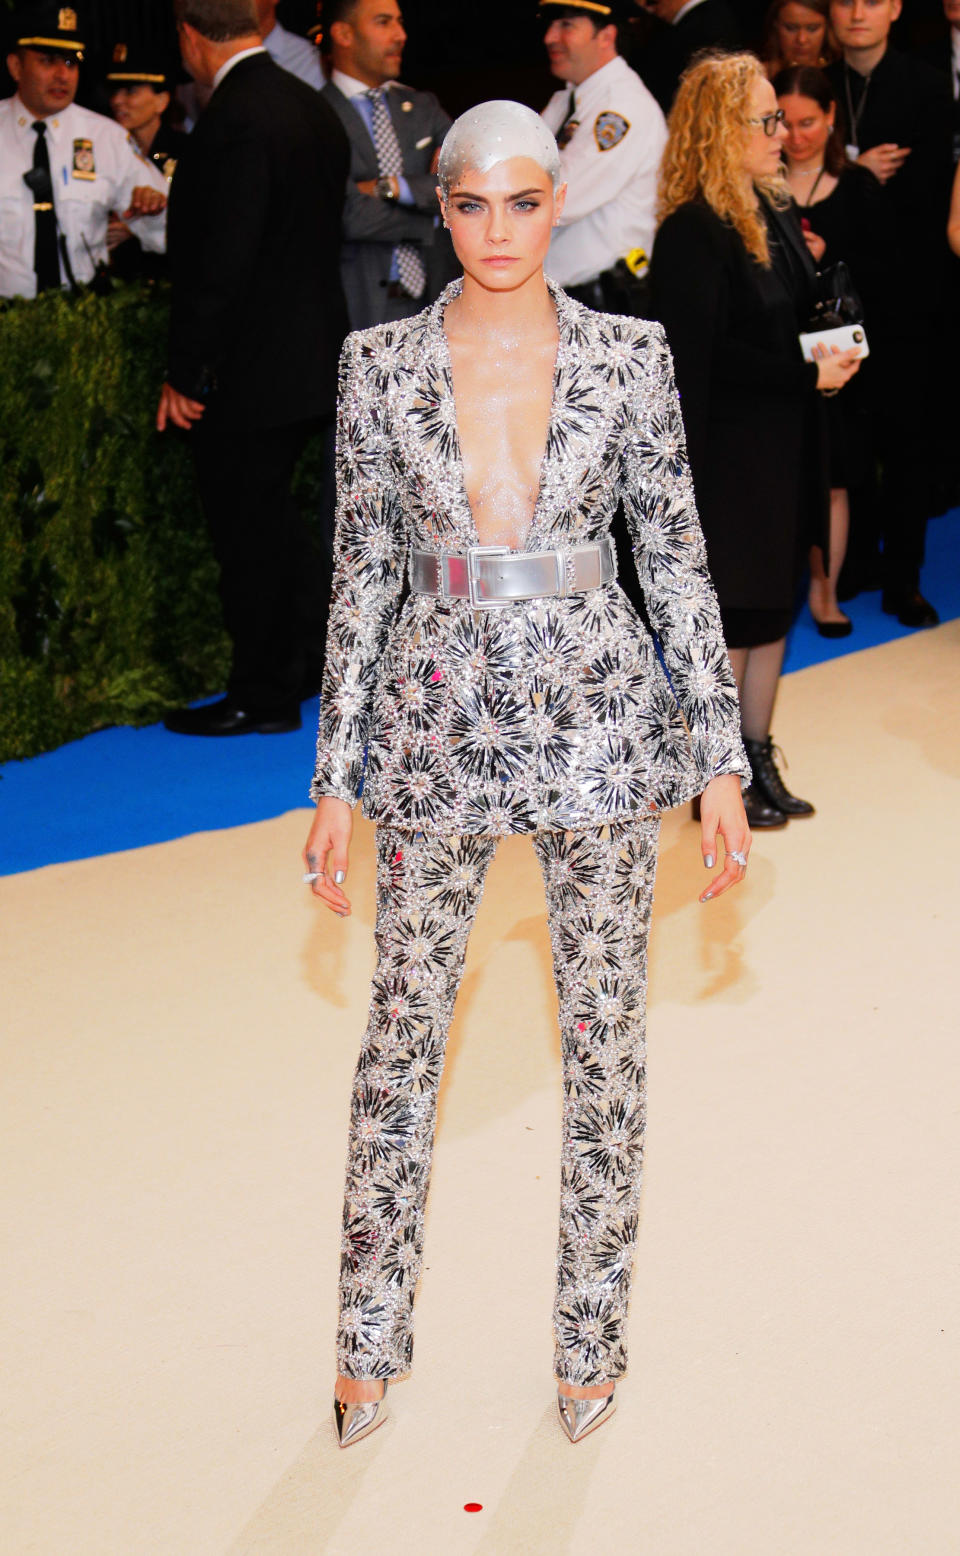 Wearing Chanel to the Met Gala in May 2017